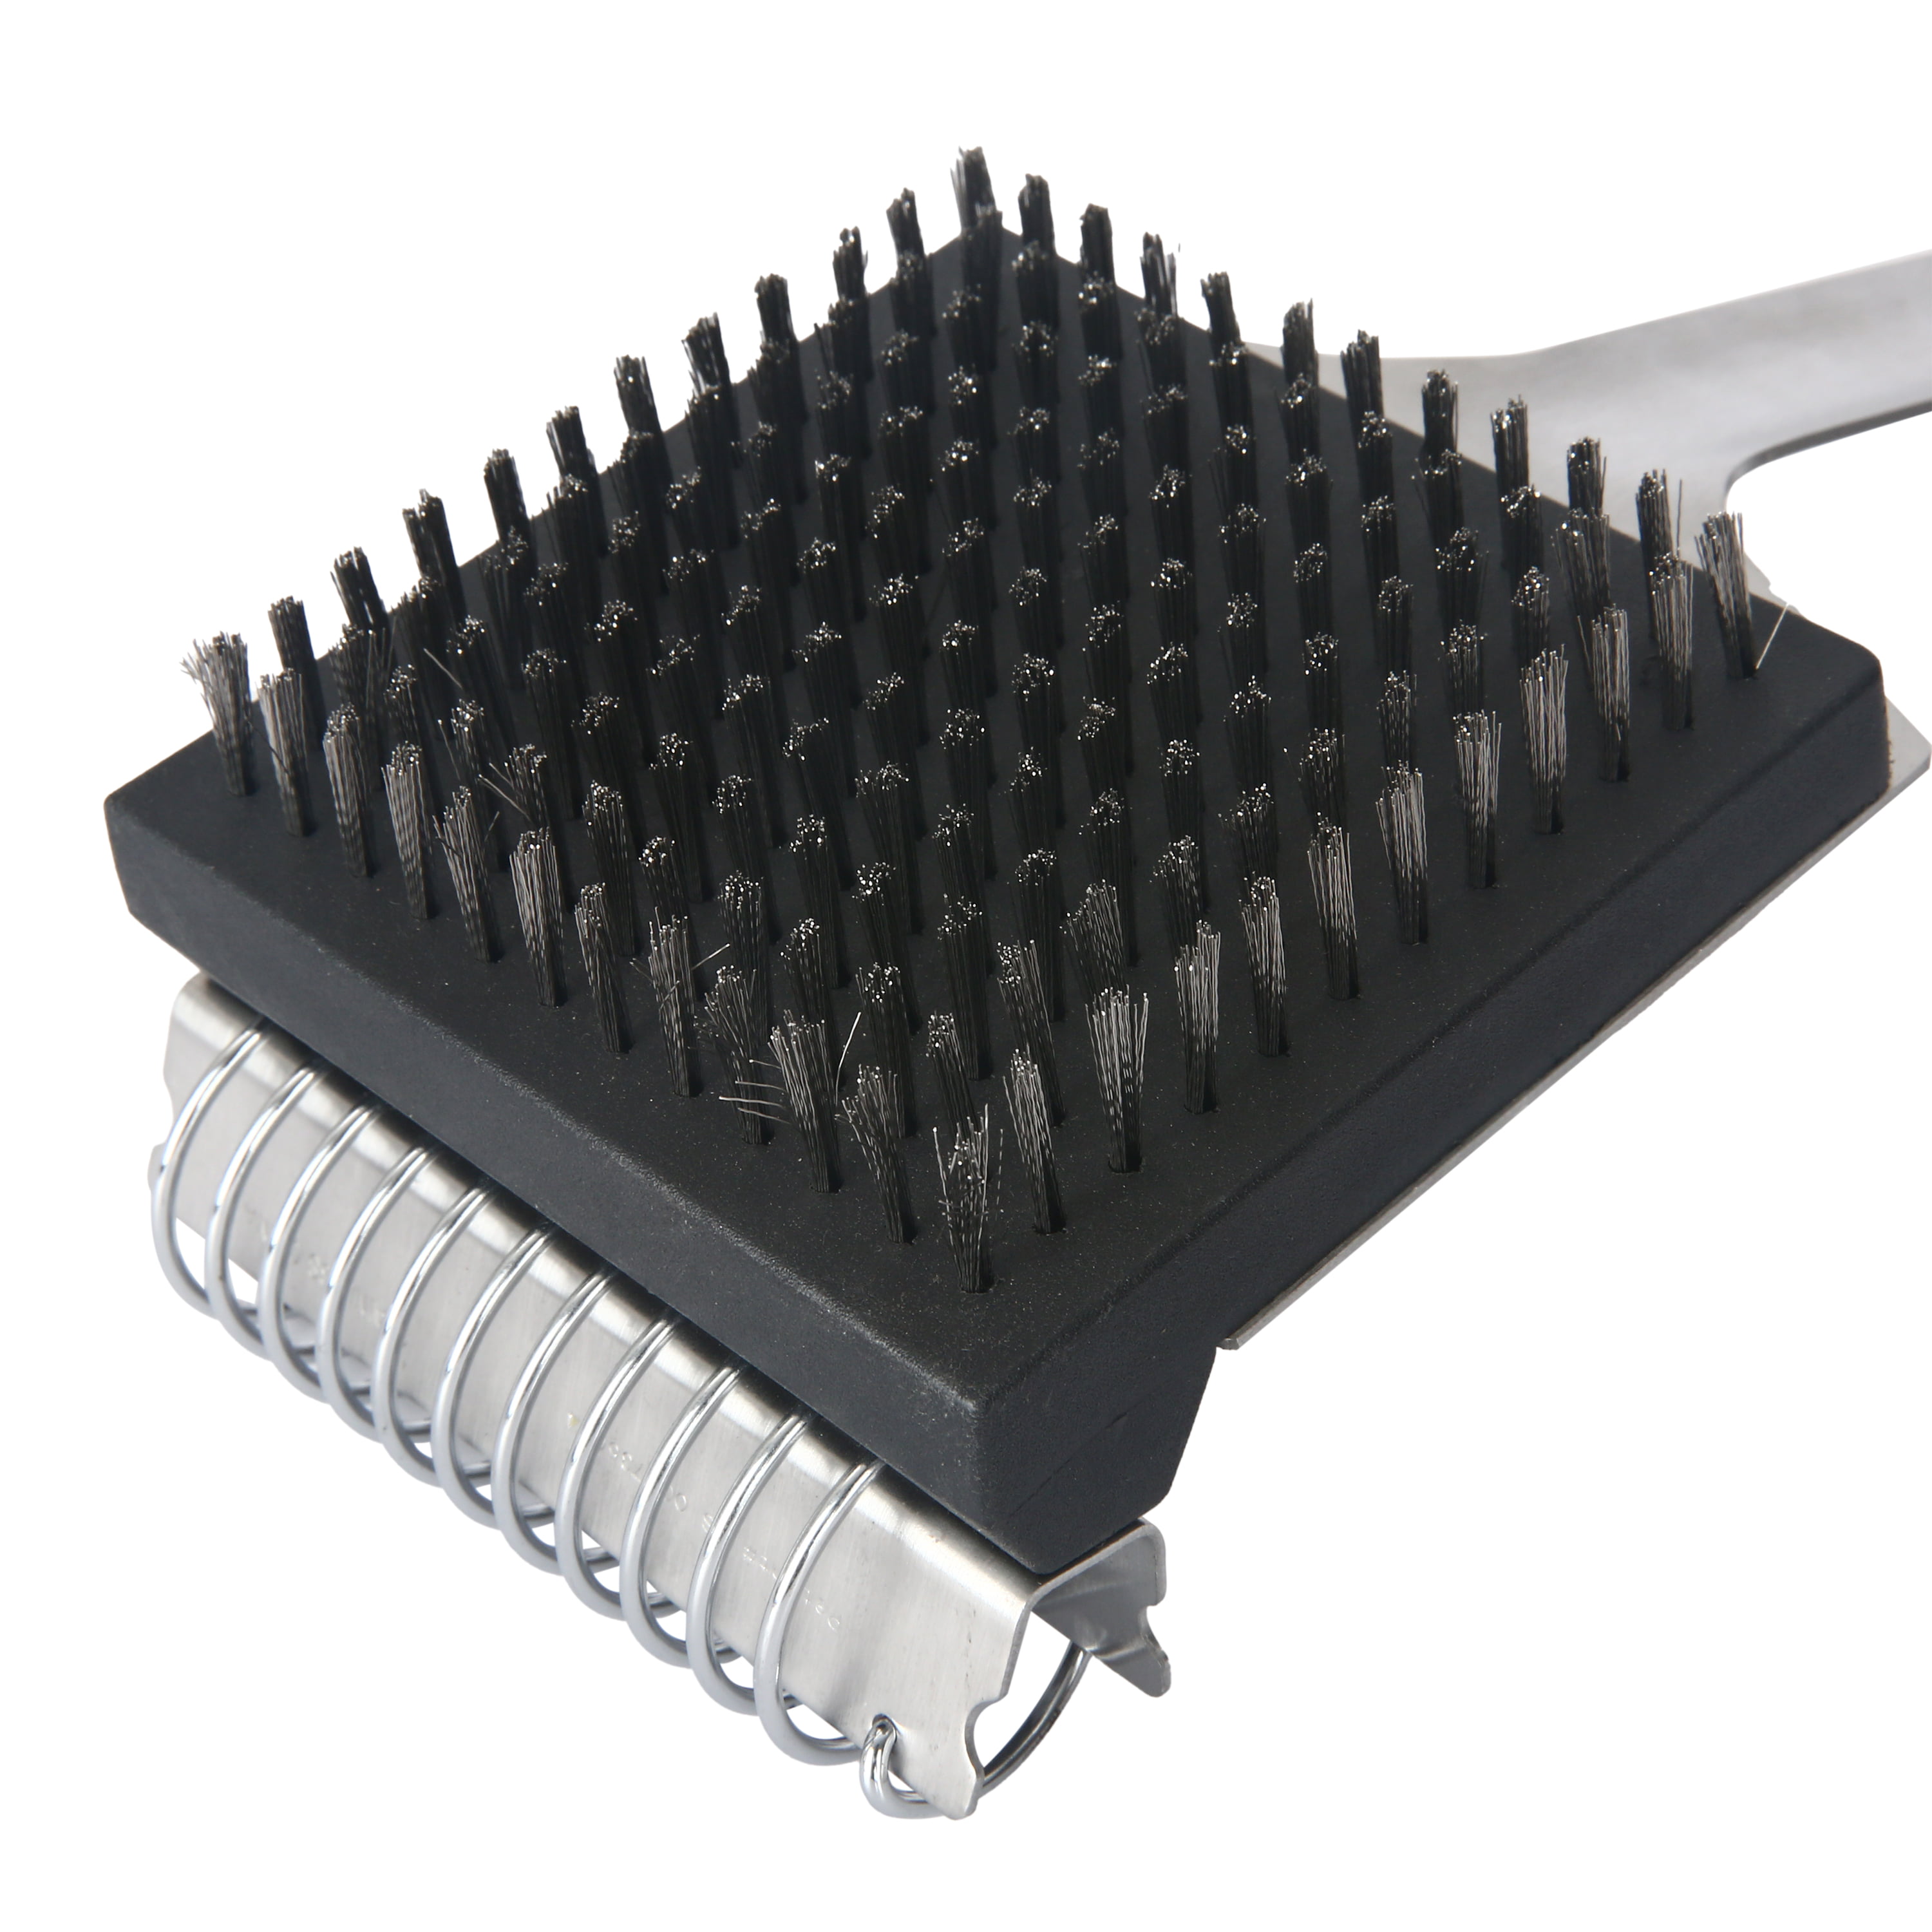 Met Lux 15-inch Grill Brush, 1 Durable Grill Cleaning Tool - Scraper, Scouring Pad, Matte Black Plastic Grill Accessory, for All Types of Grills - Res